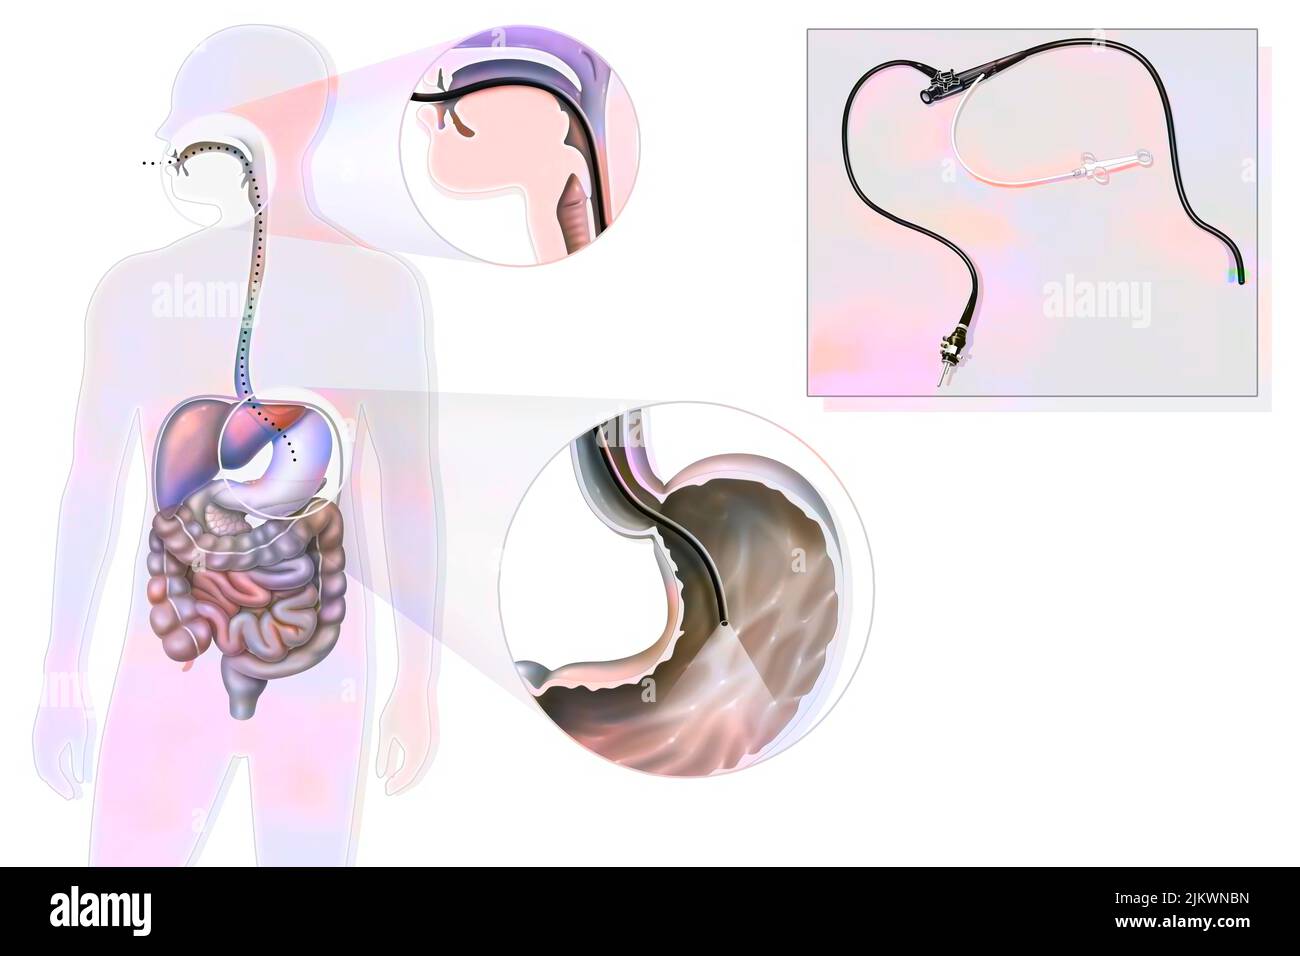 Gastroscopy: route and location of the gastro fiberscope introduced through the mouth. Stock Photo